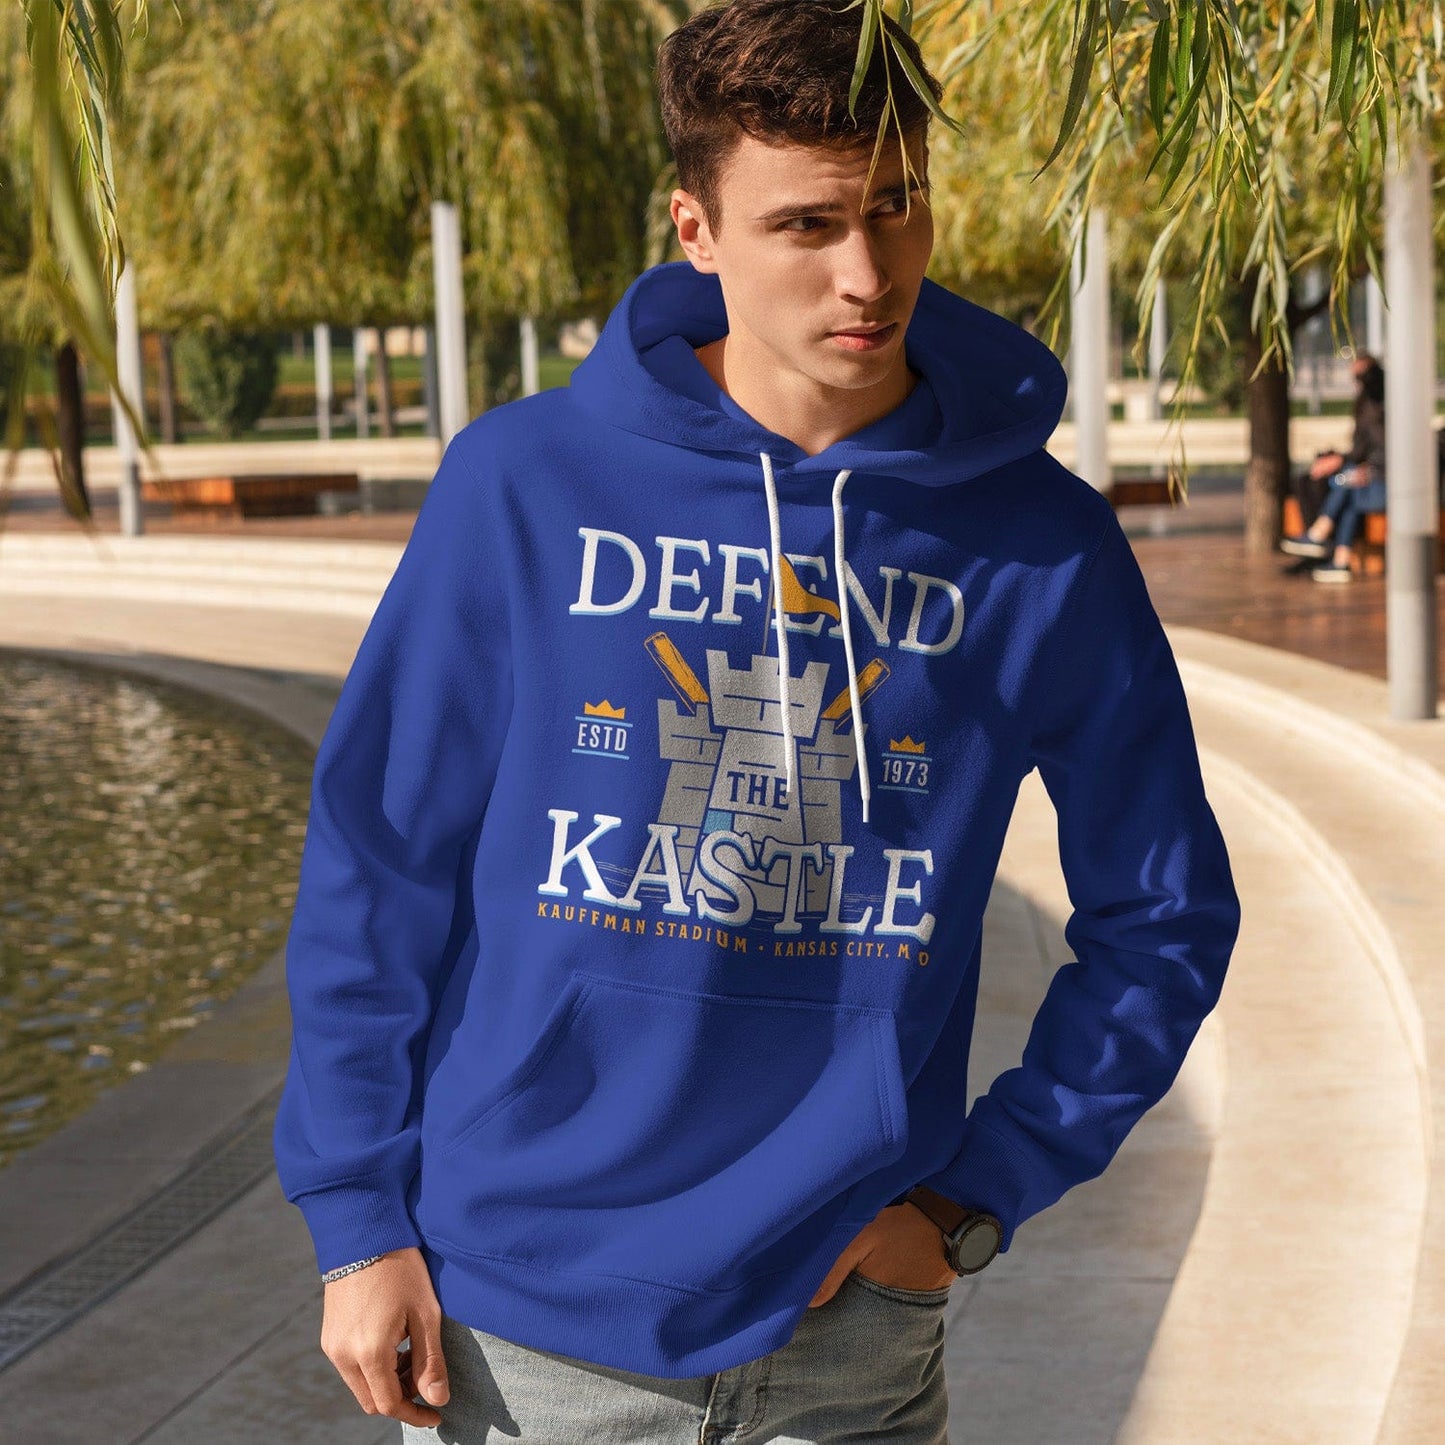 KC Swag Kansas City Royals powder, gold DEFEND THE KASTLE on blue fleece pullover hoodie worn by male model standing near water in public park